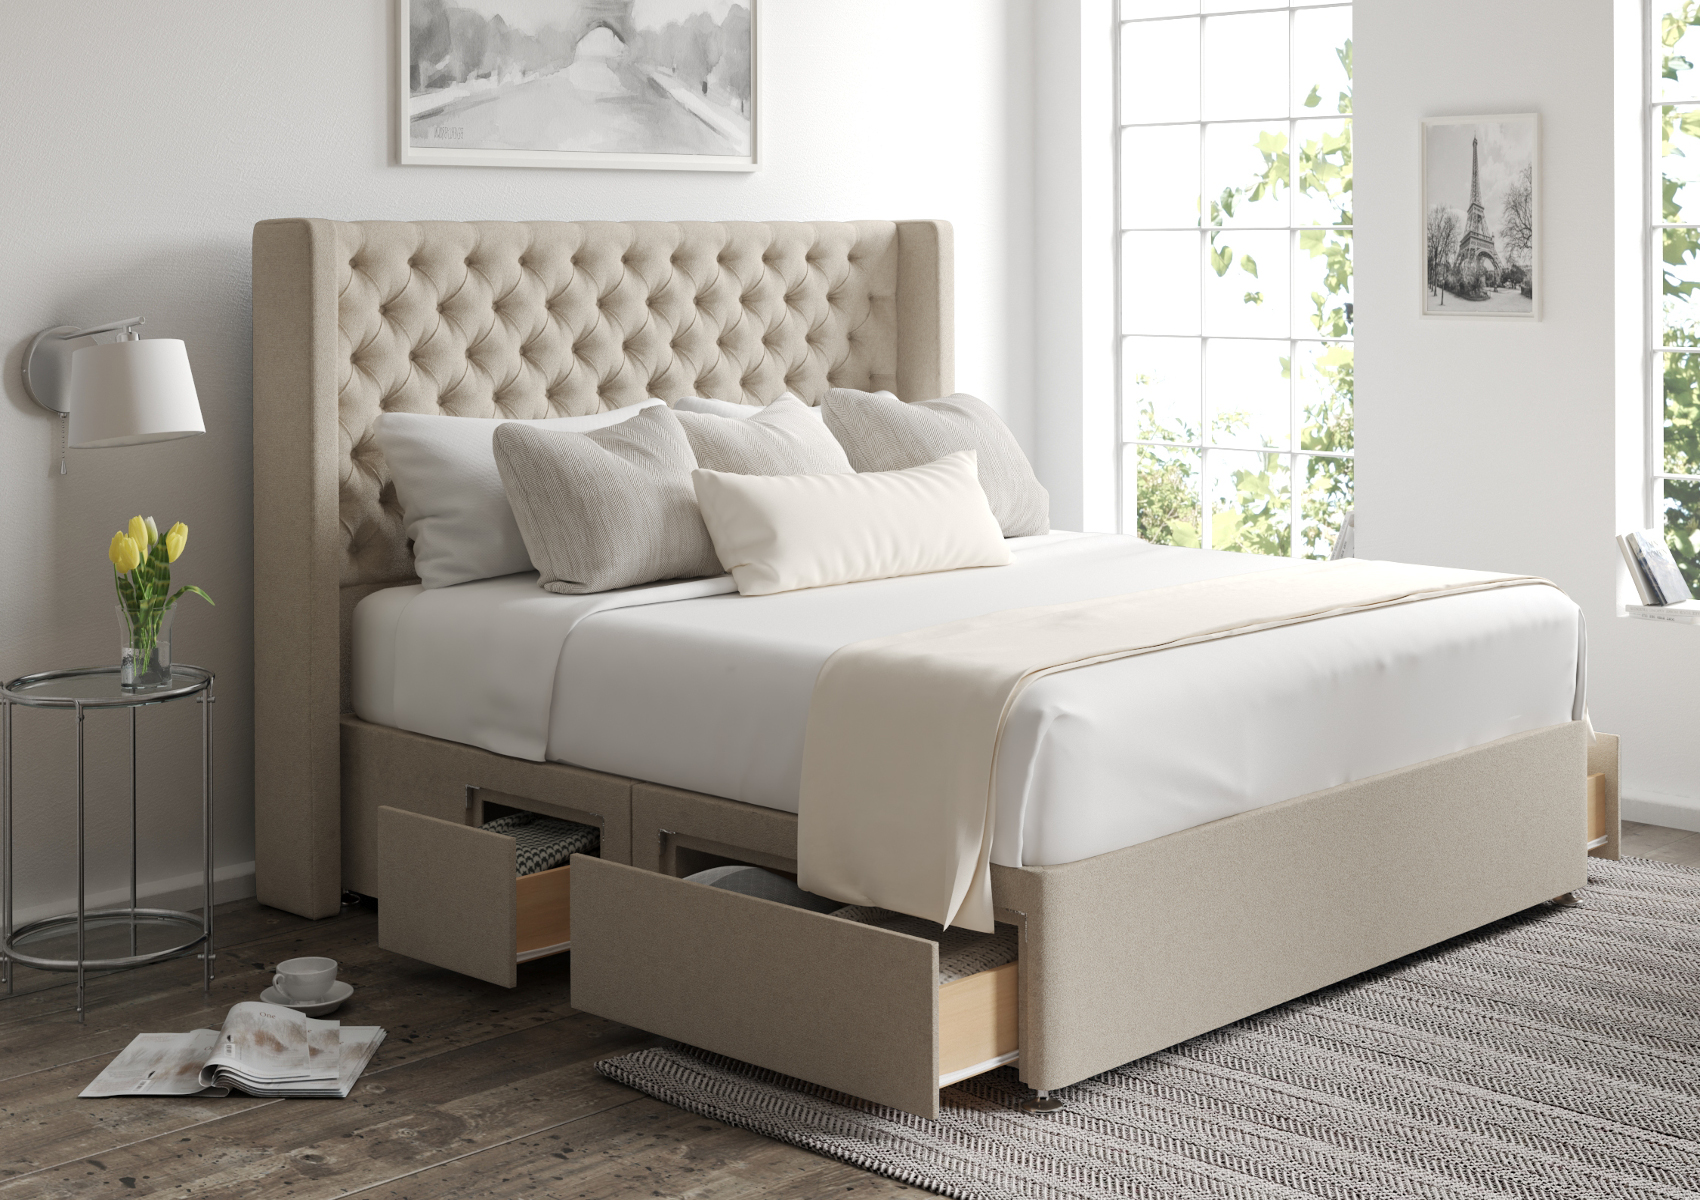 View Bella Trebla Stone Upholstered Double Bed Time4Sleep information